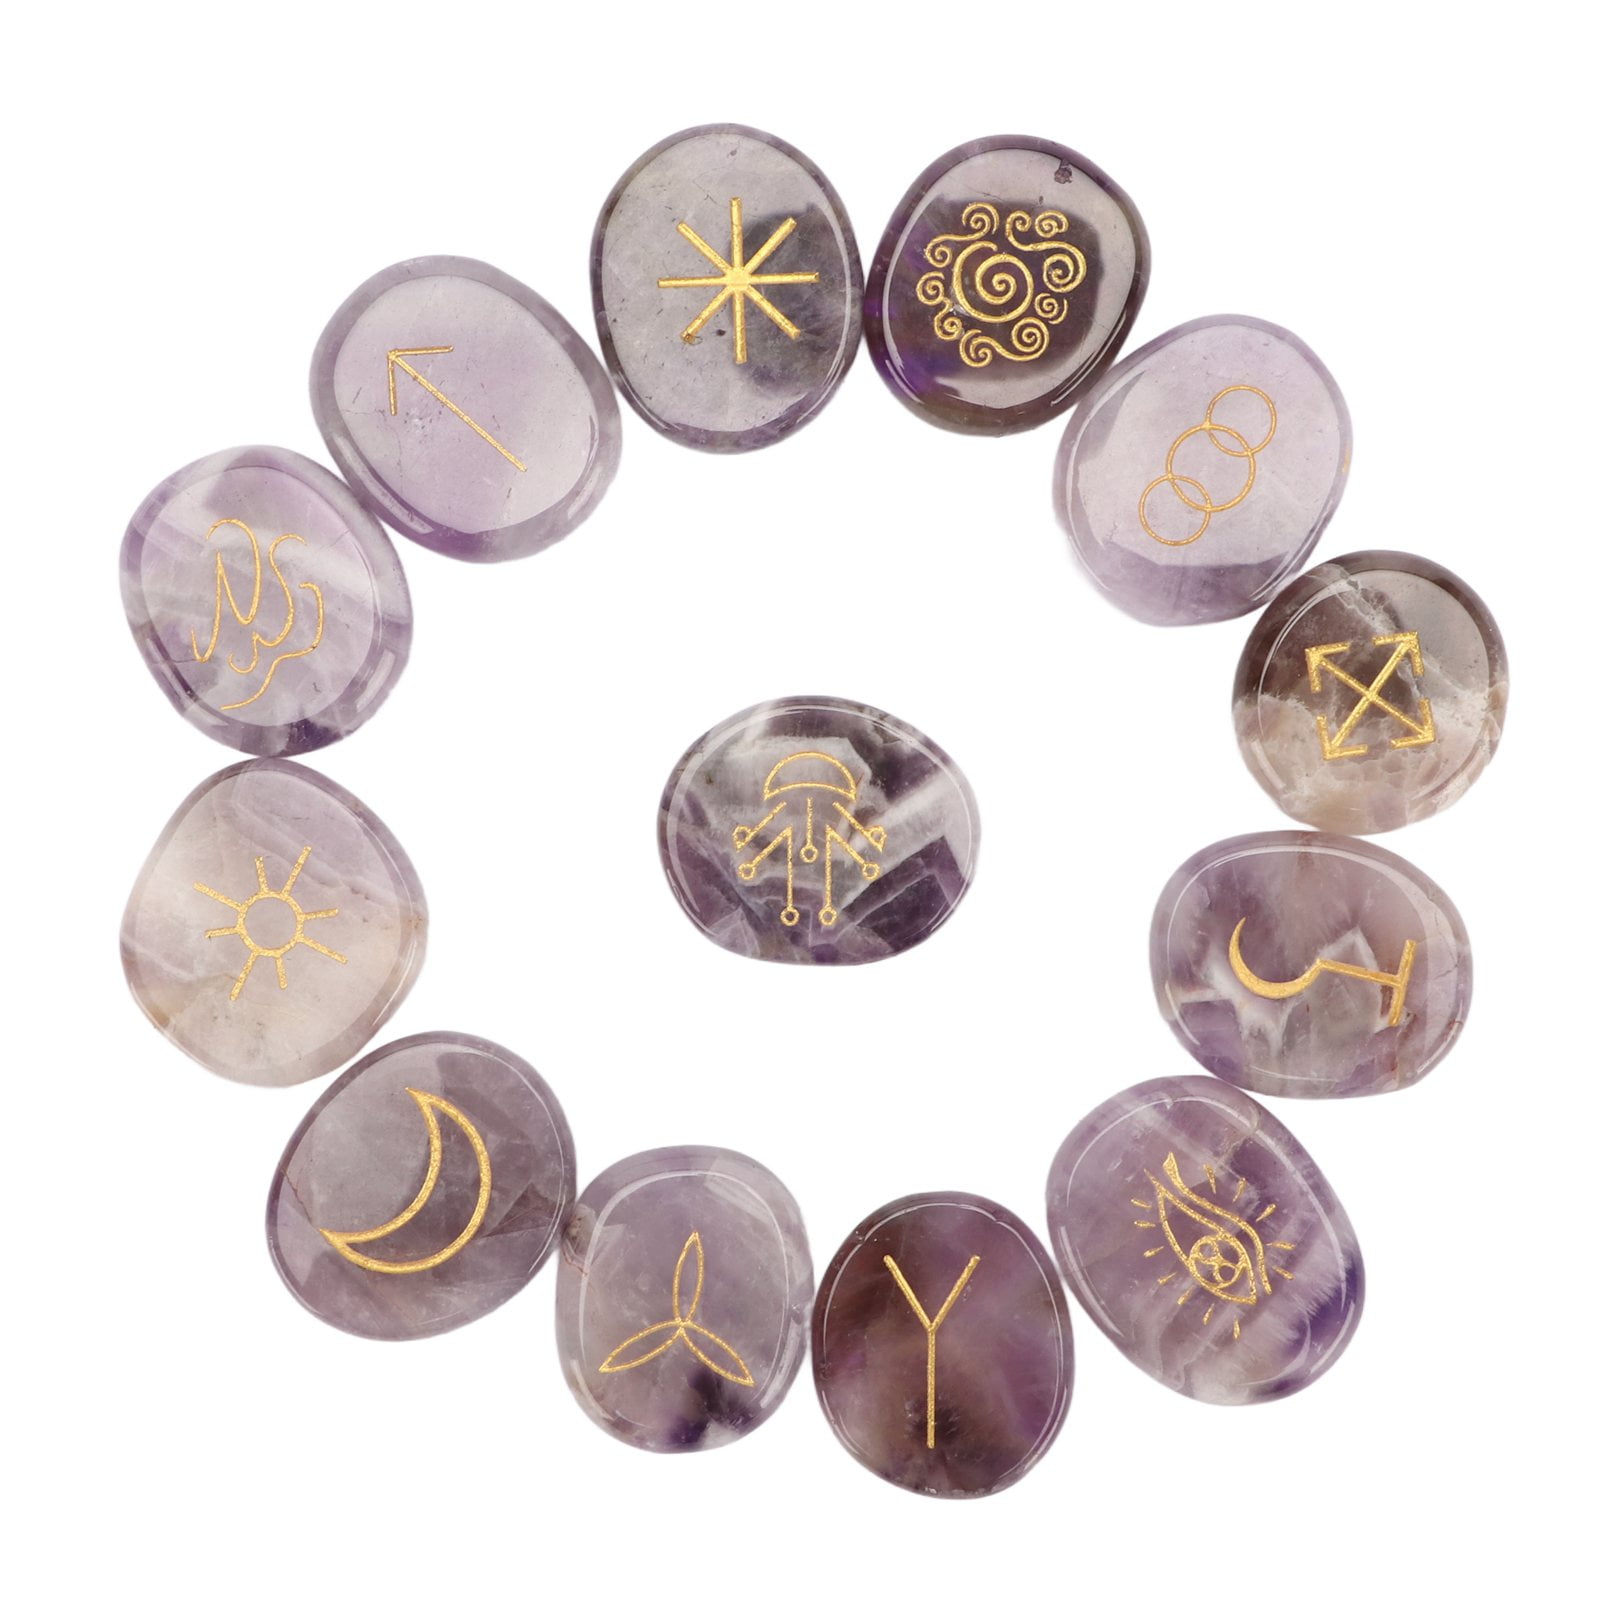 13 Pcs Rune Stone Set Empower Mind Promote Clear Thinking Crystal Runes ...